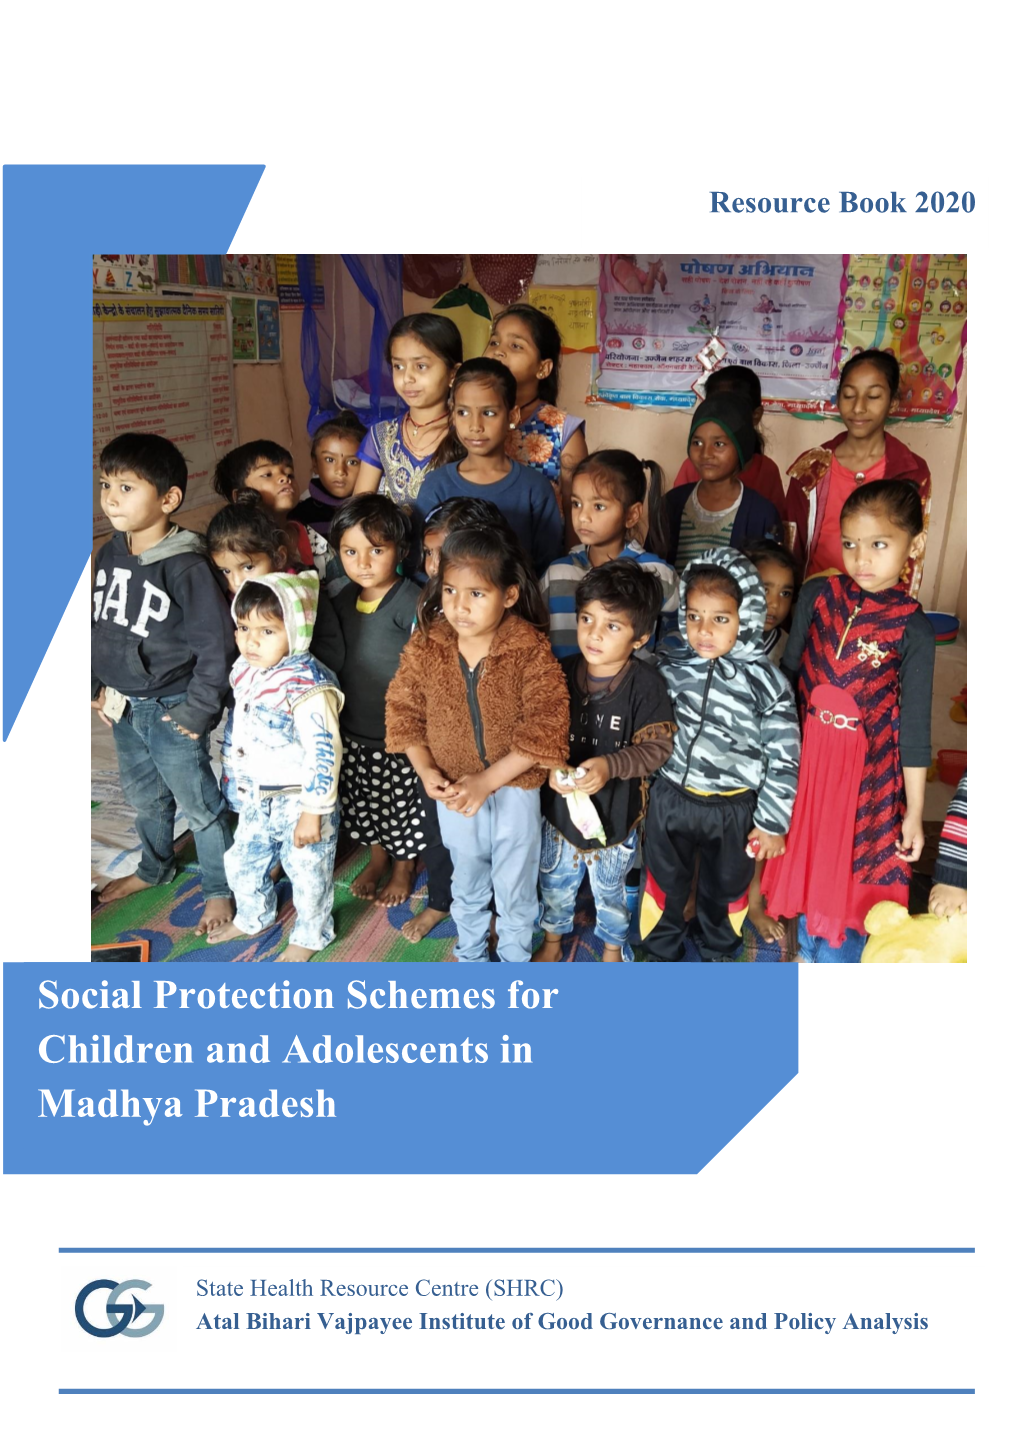 Social Protection Schemes for Children and Adolescents in Madhya Pradesh